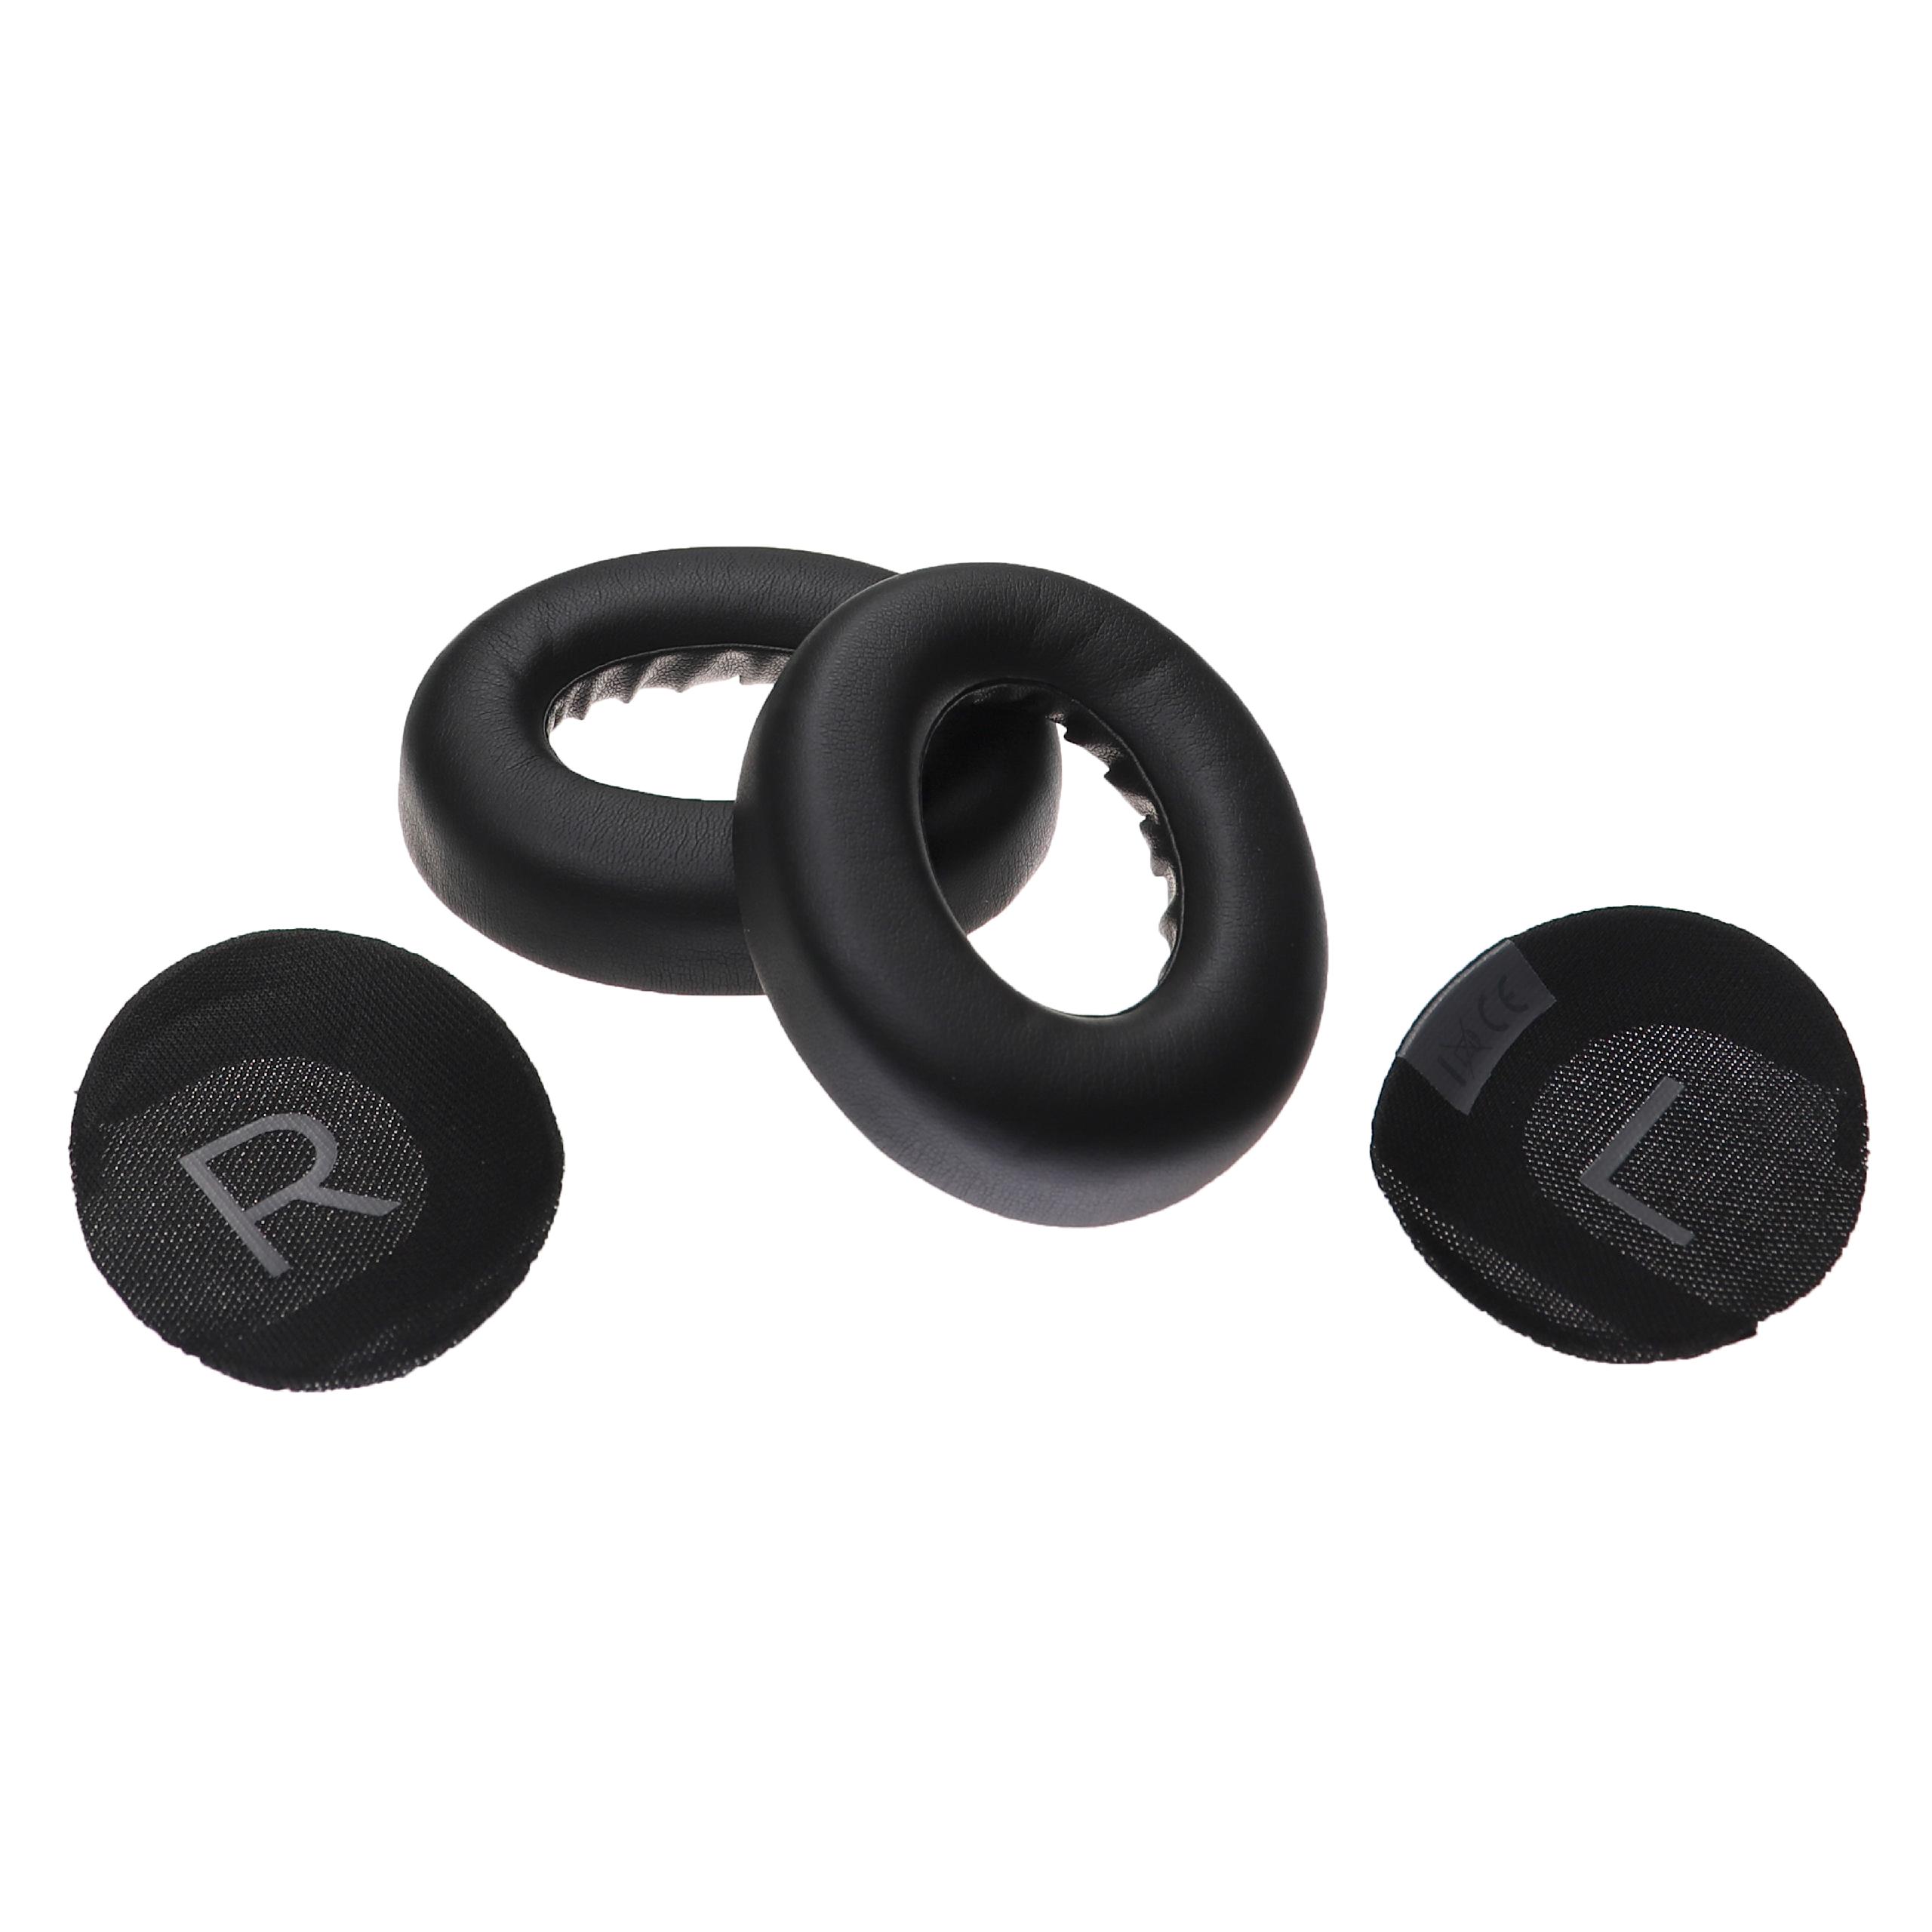 Ear Pads suitable for Bose NC 700 Headphones etc. - with Memory Foam, Soft Material, 23 mm thick